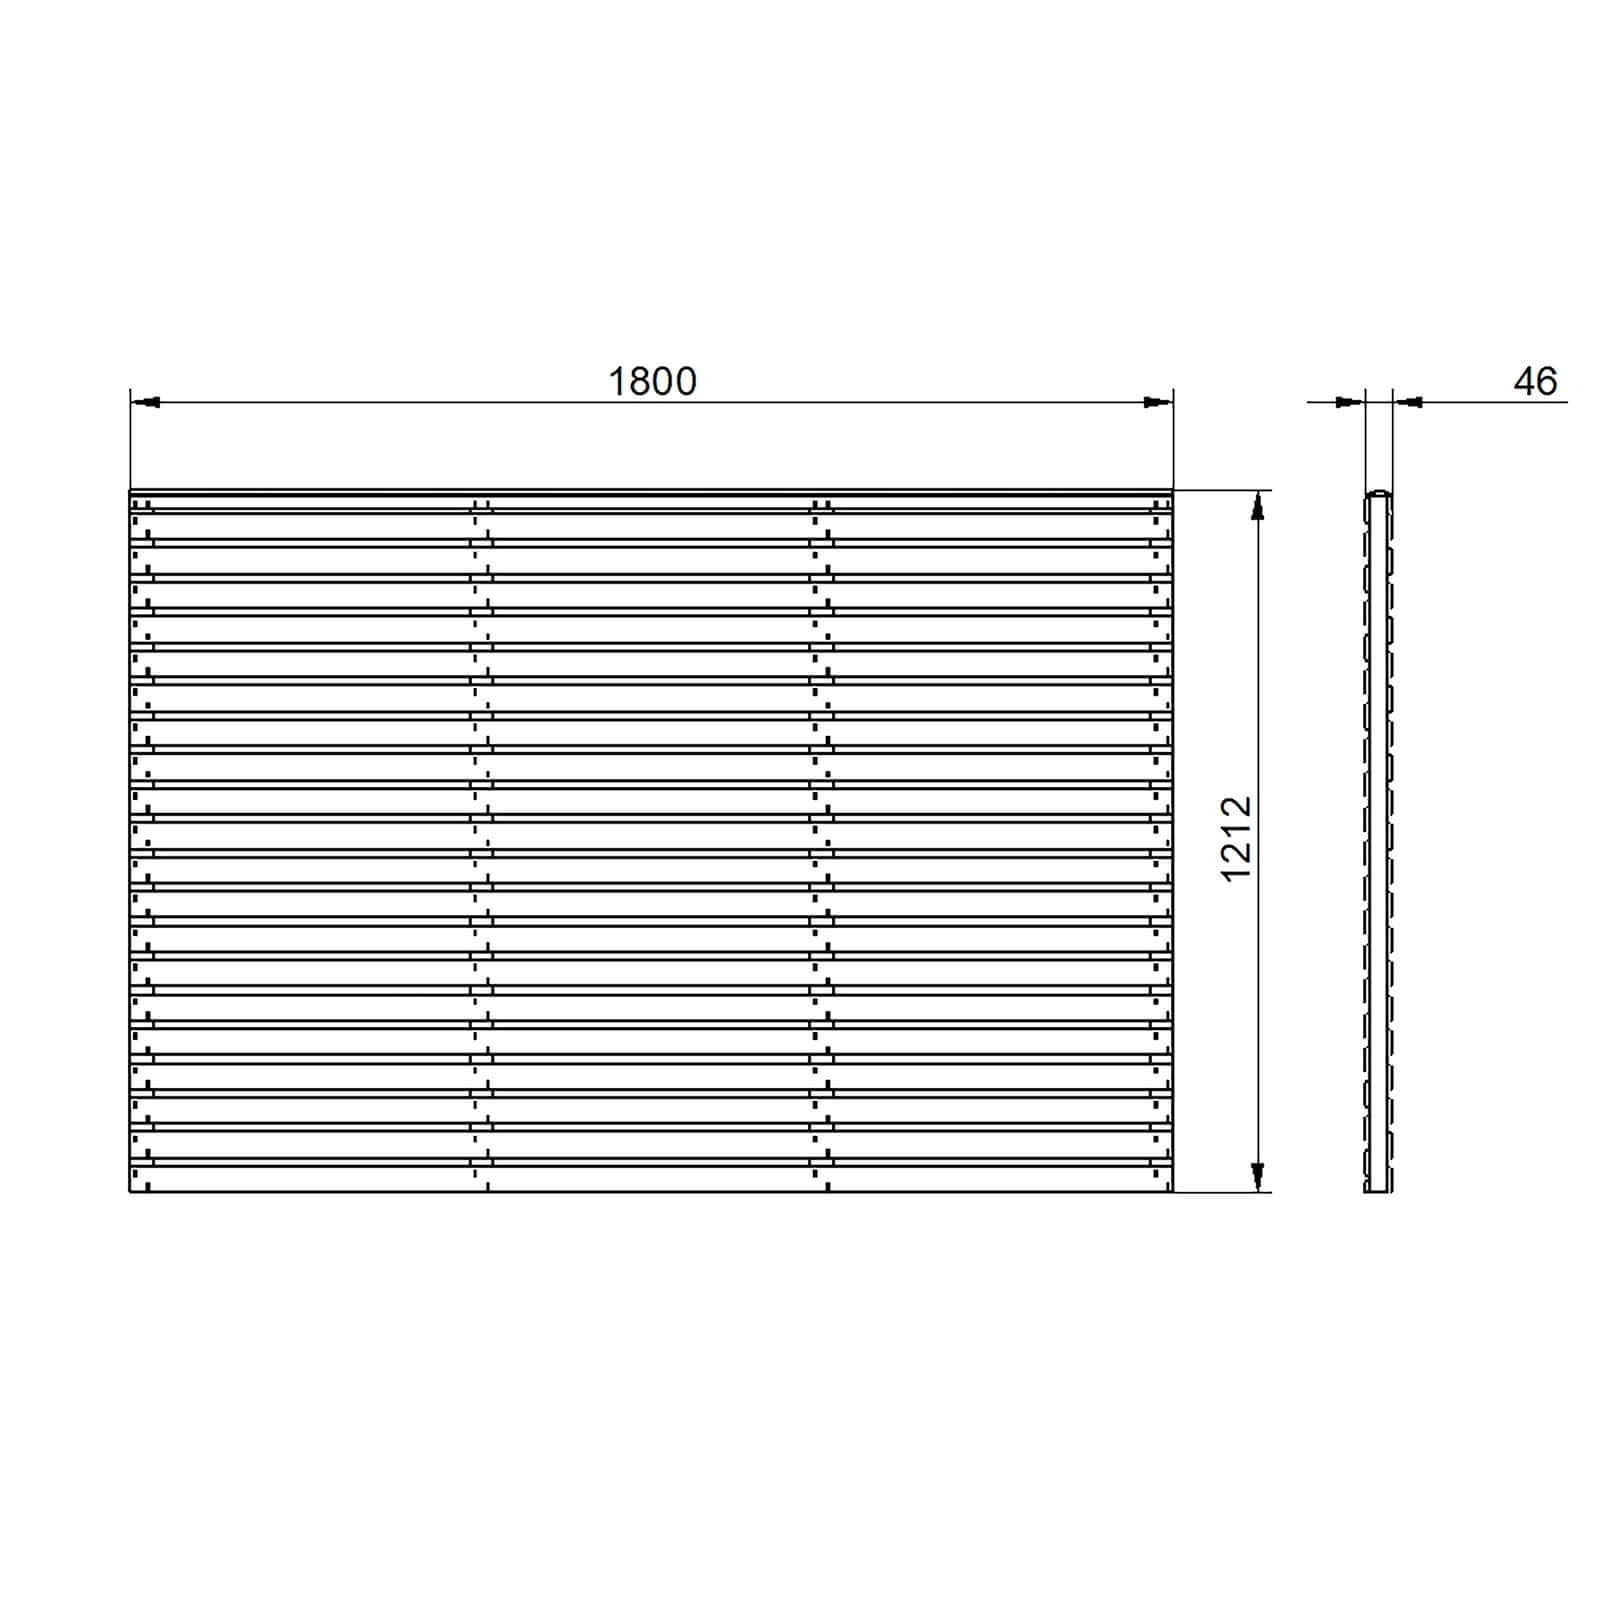 6ft x 4ft (1.8m x 1.2m) Pressure Treated Contemporary Double Slatted Fence Panel - Pack of 5